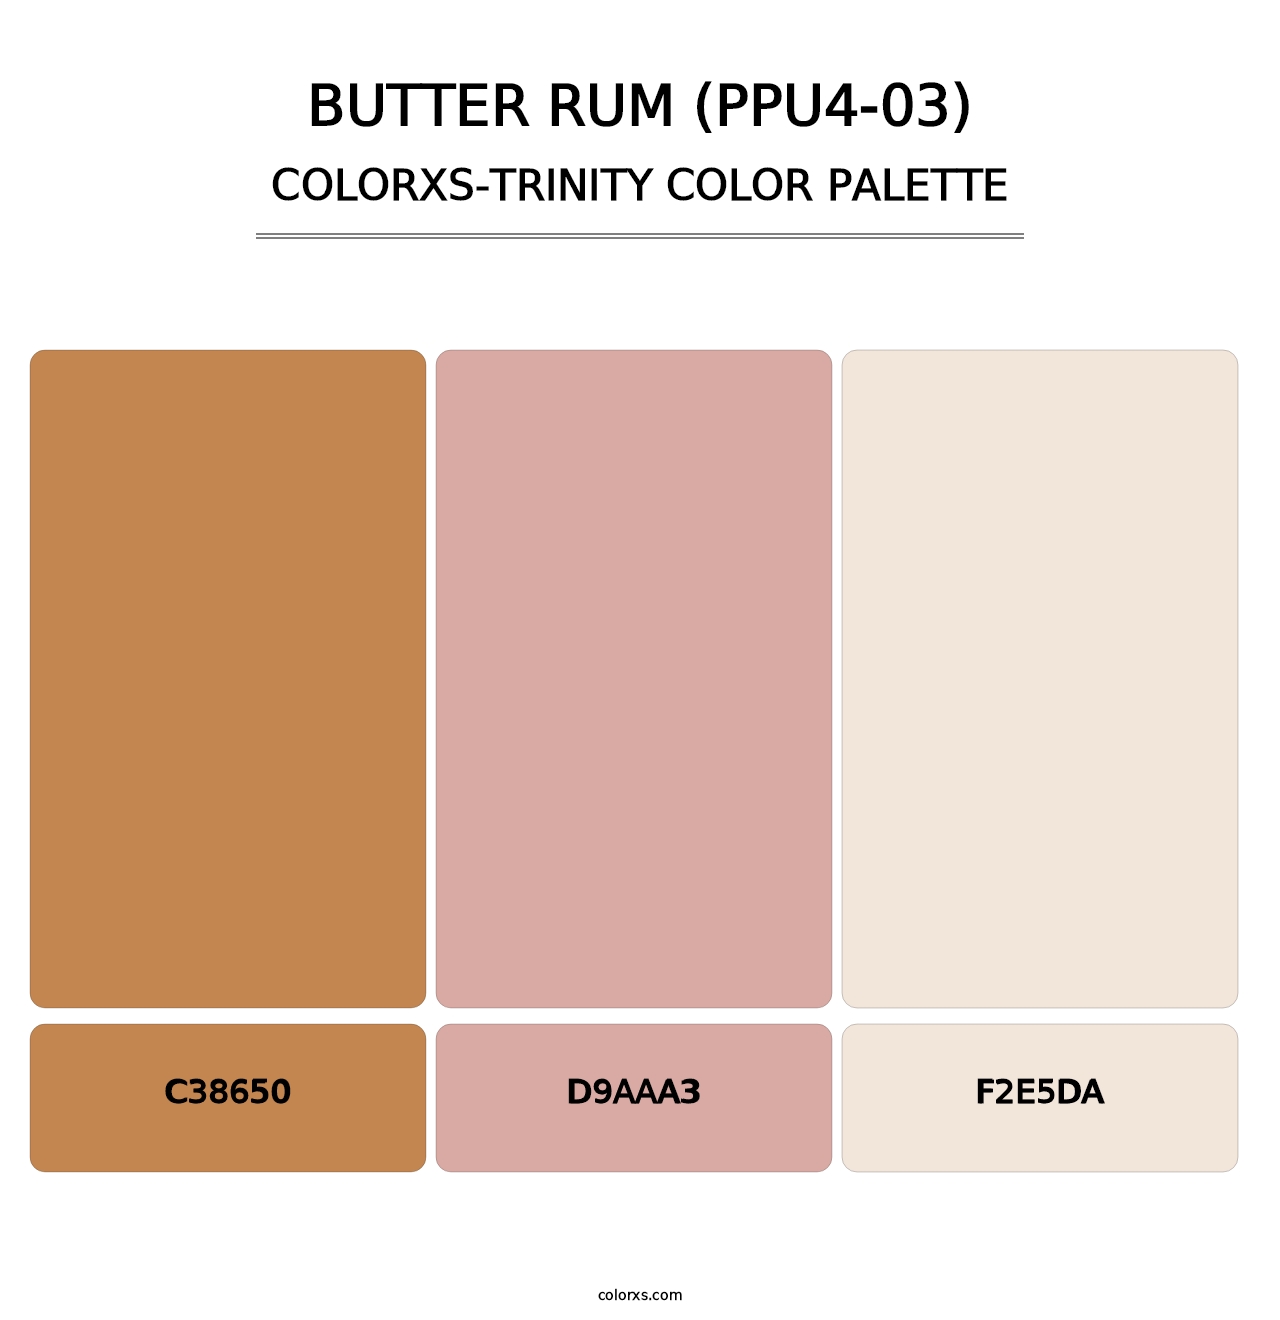 Butter Rum (PPU4-03) - Colorxs Trinity Palette